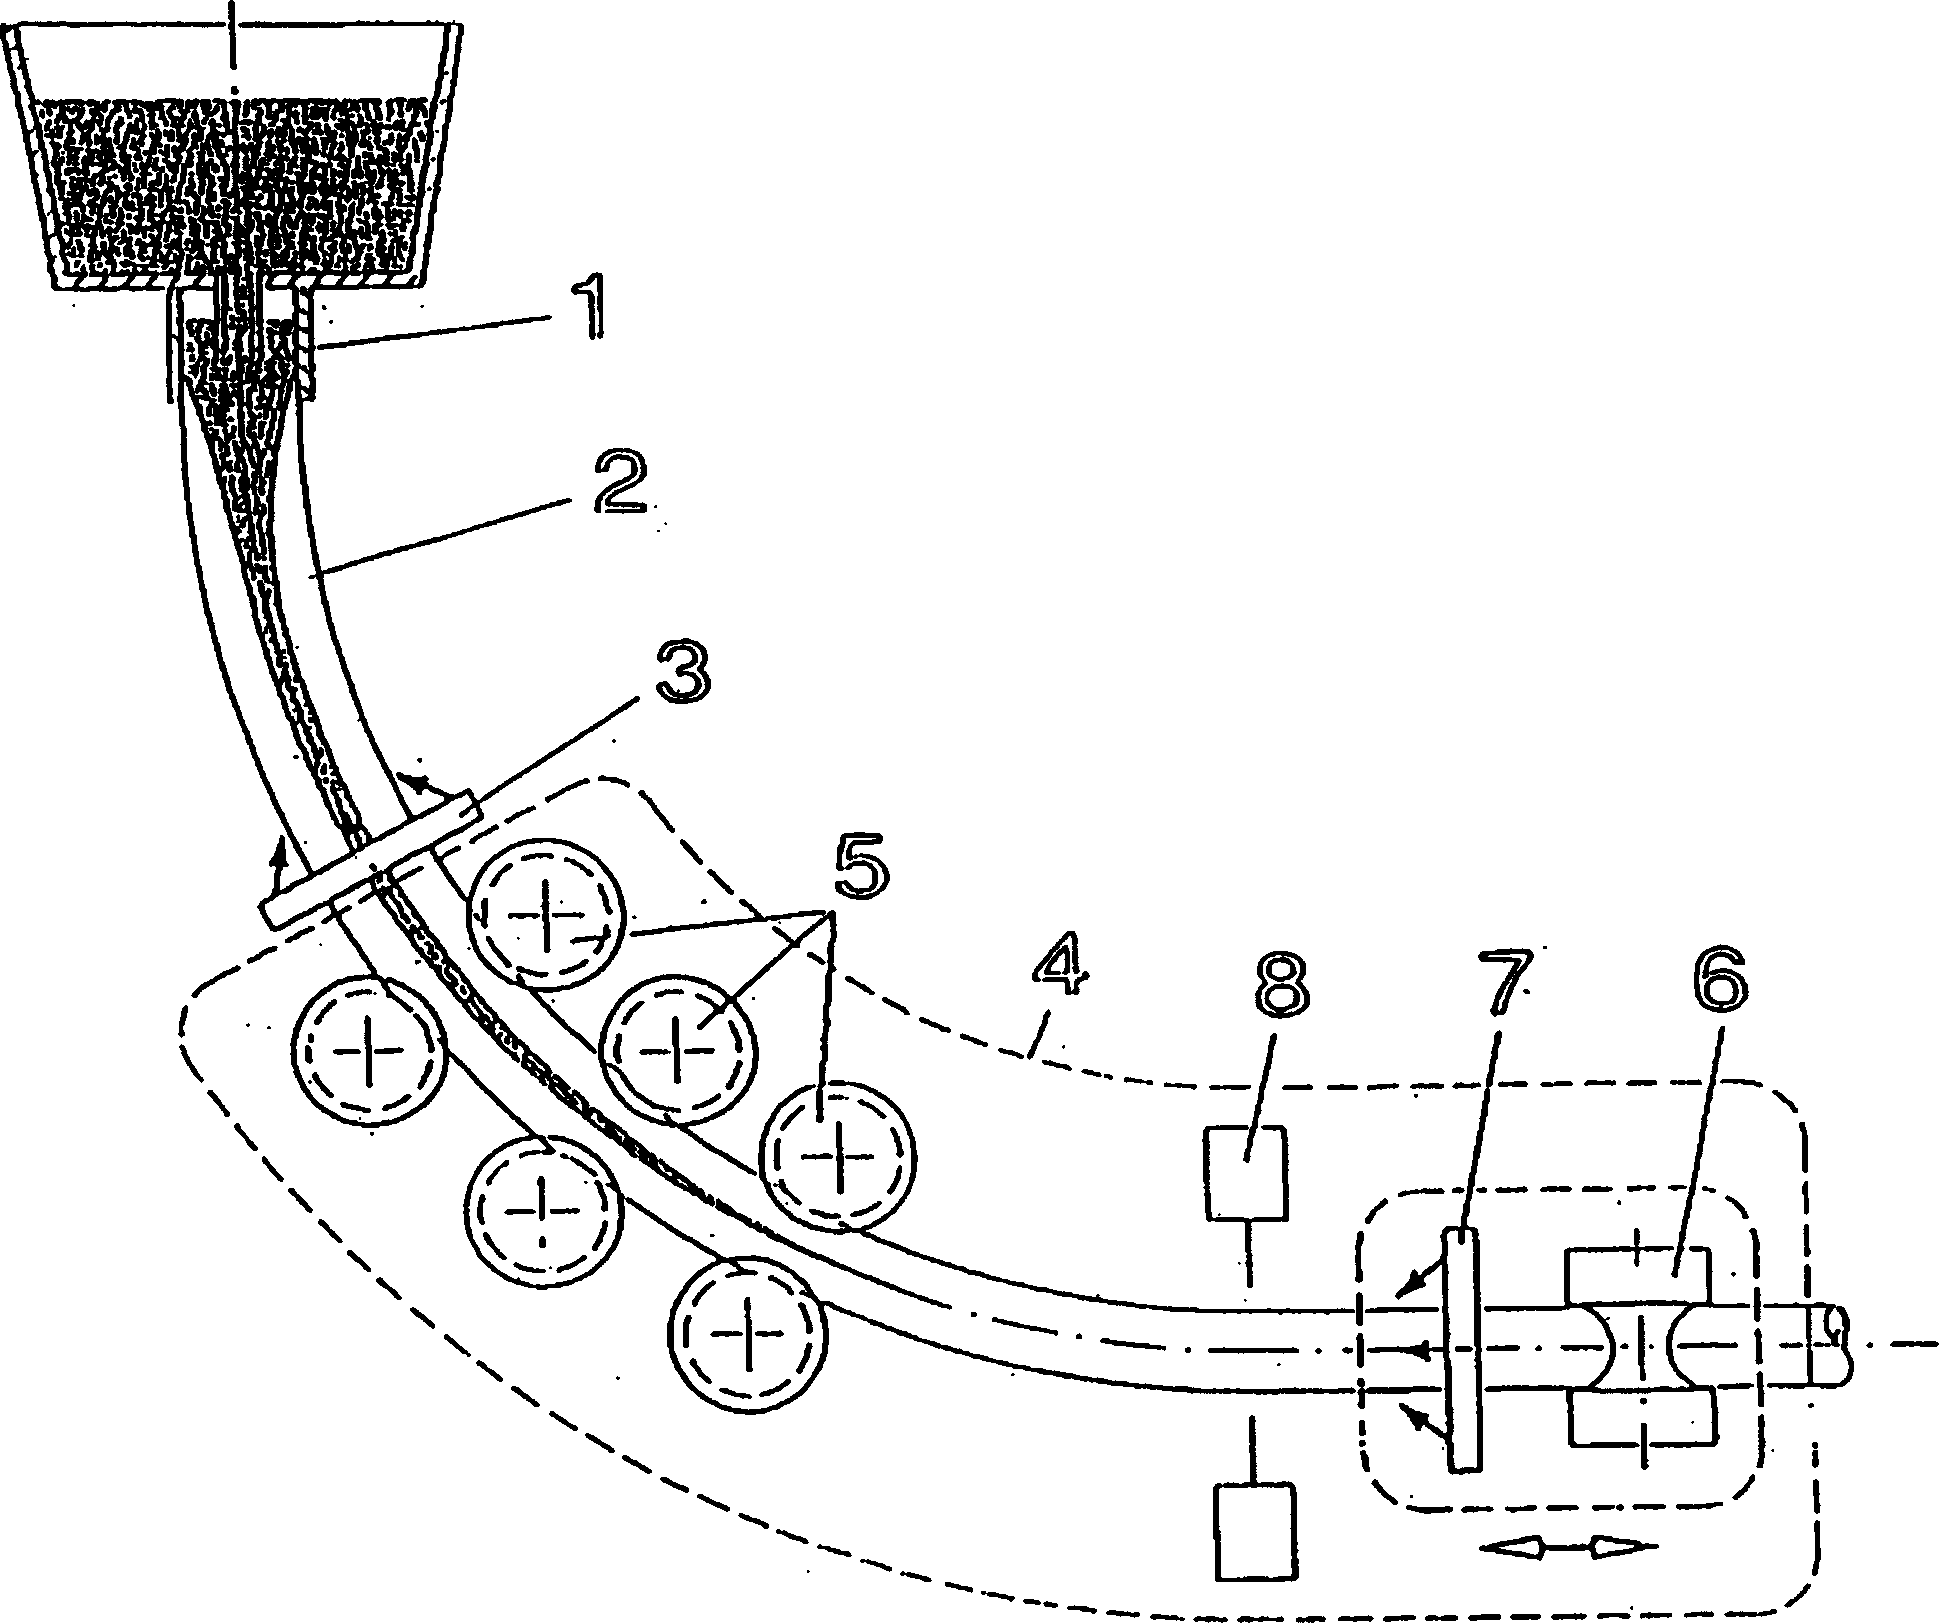 Method of producing round billets and its equipment